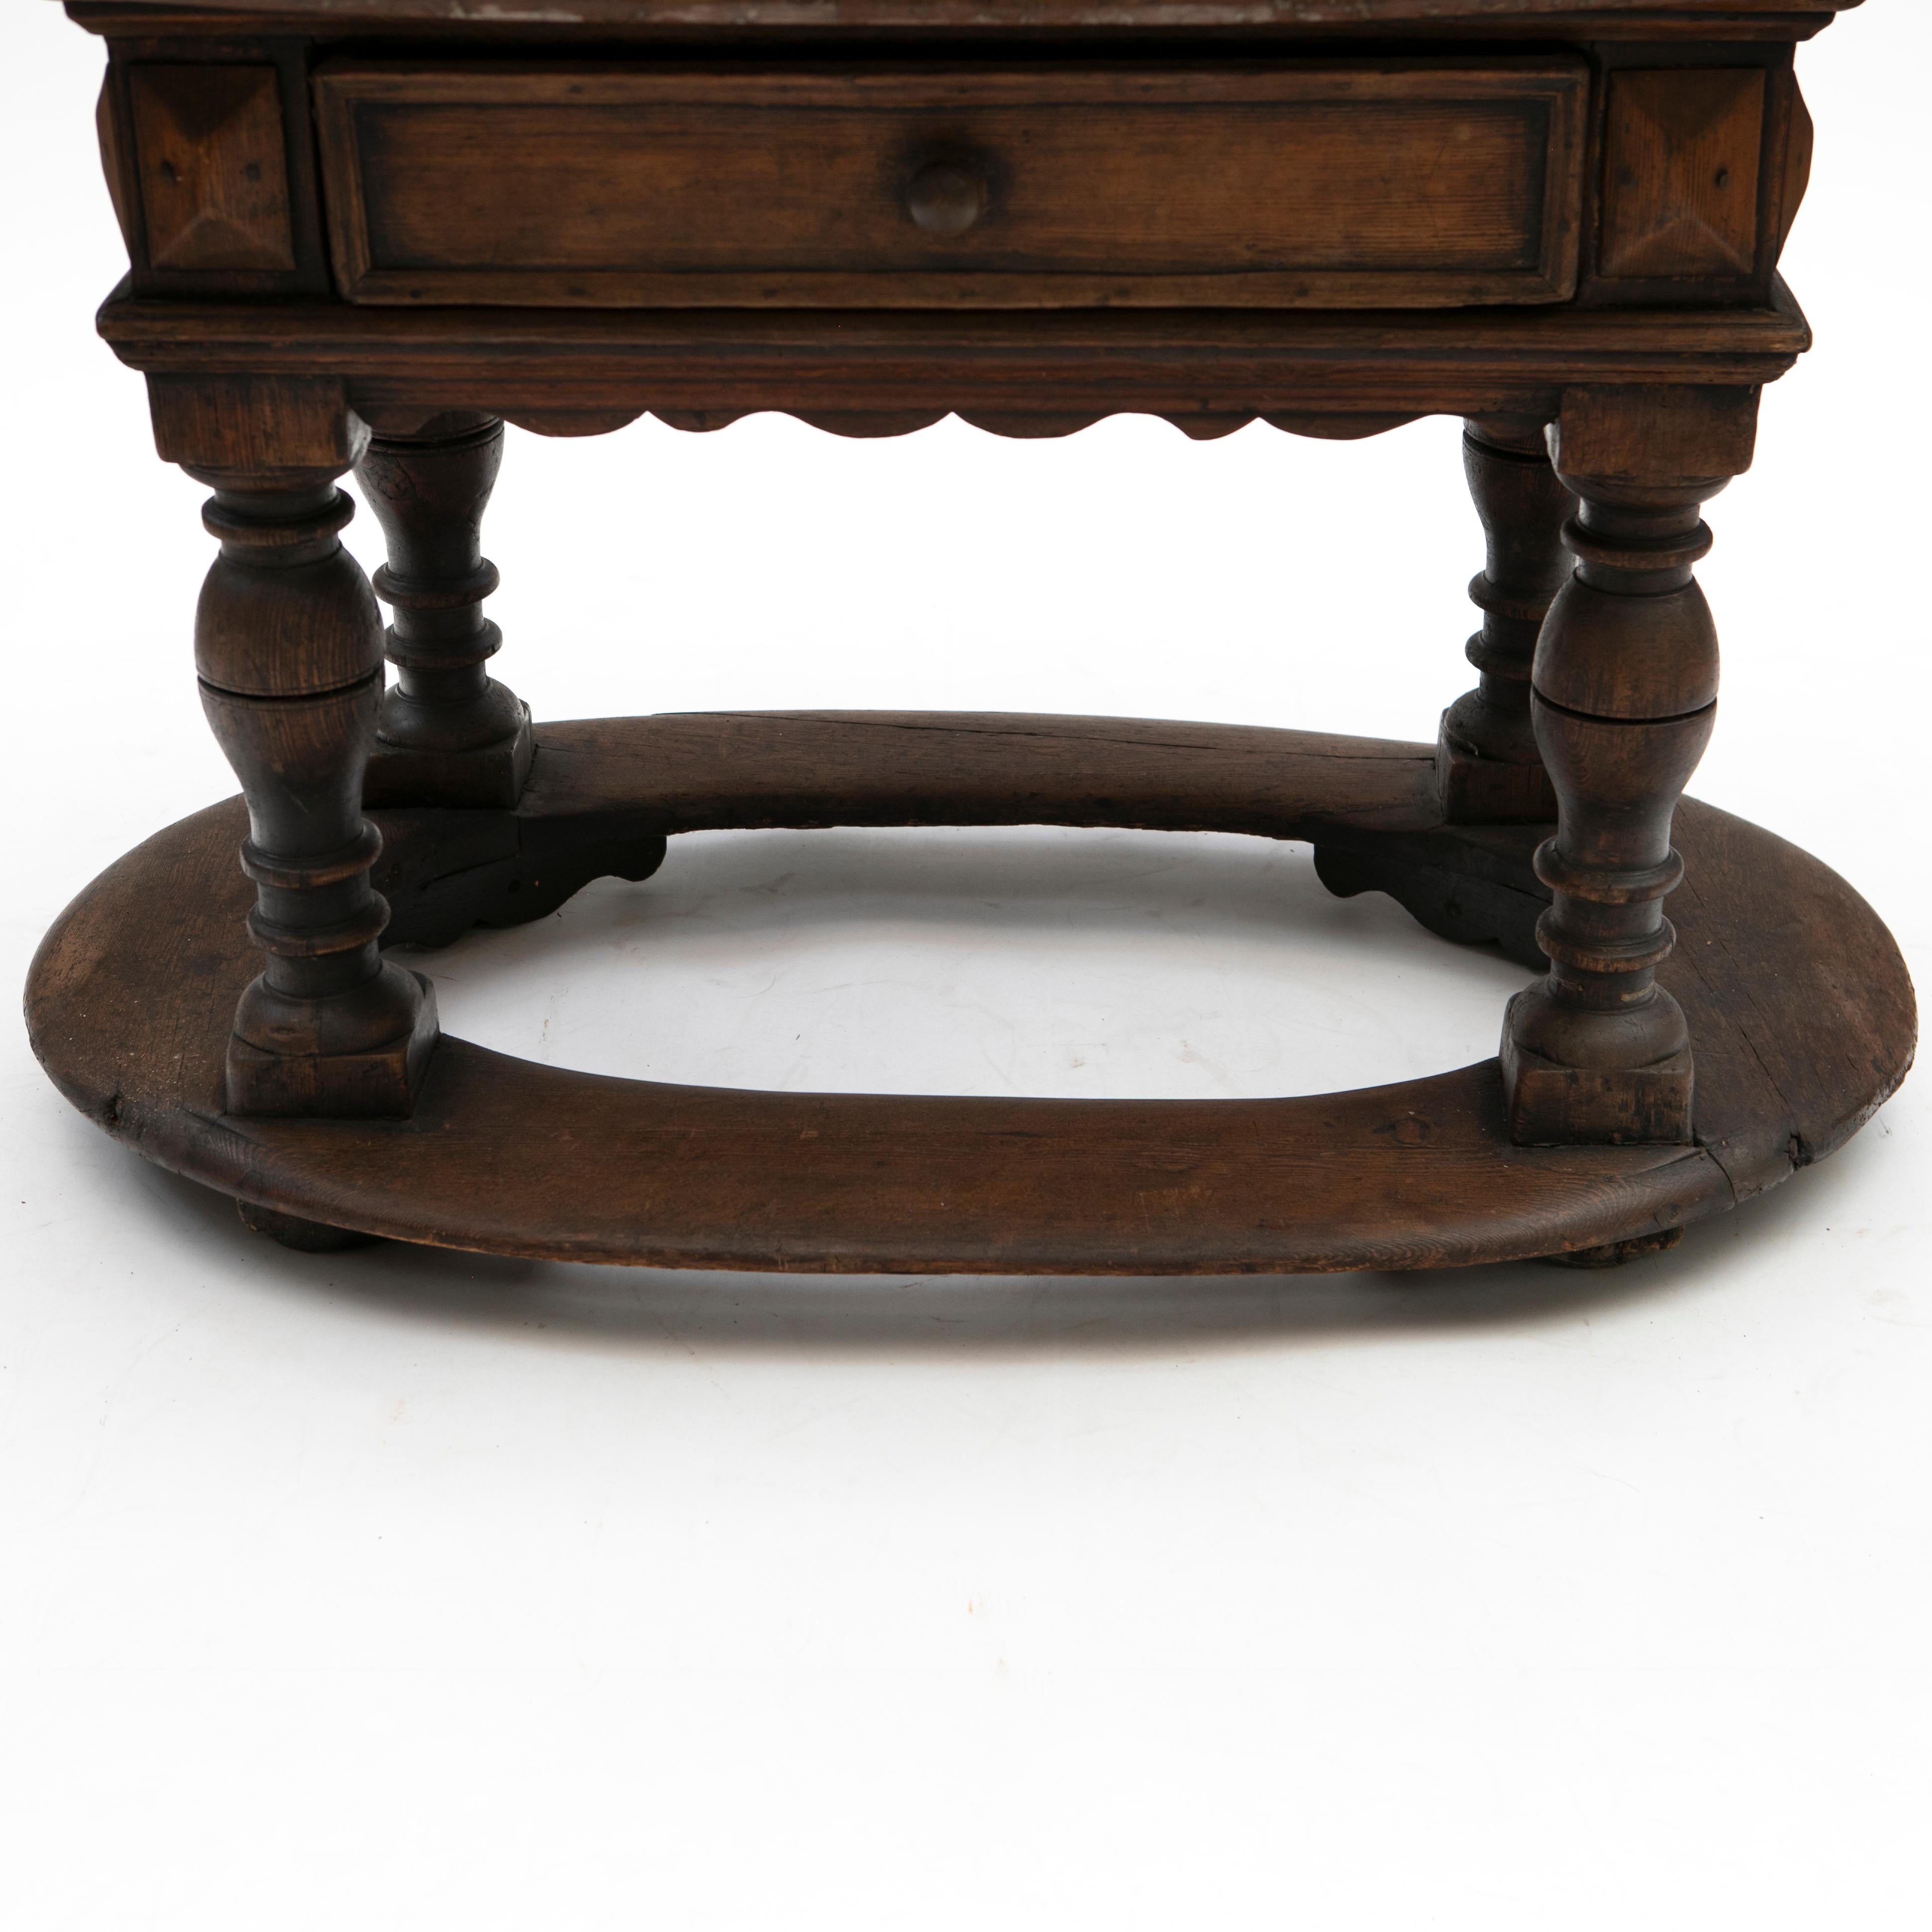 Baroque table in oak and with Öland limestone top.

The oval limestone top contains pre-historic fossils in its surface.
Scalloped skirt with one drawer to the front resting on baluster-shaped baroque legs joined by oval stretcher.

Sweden